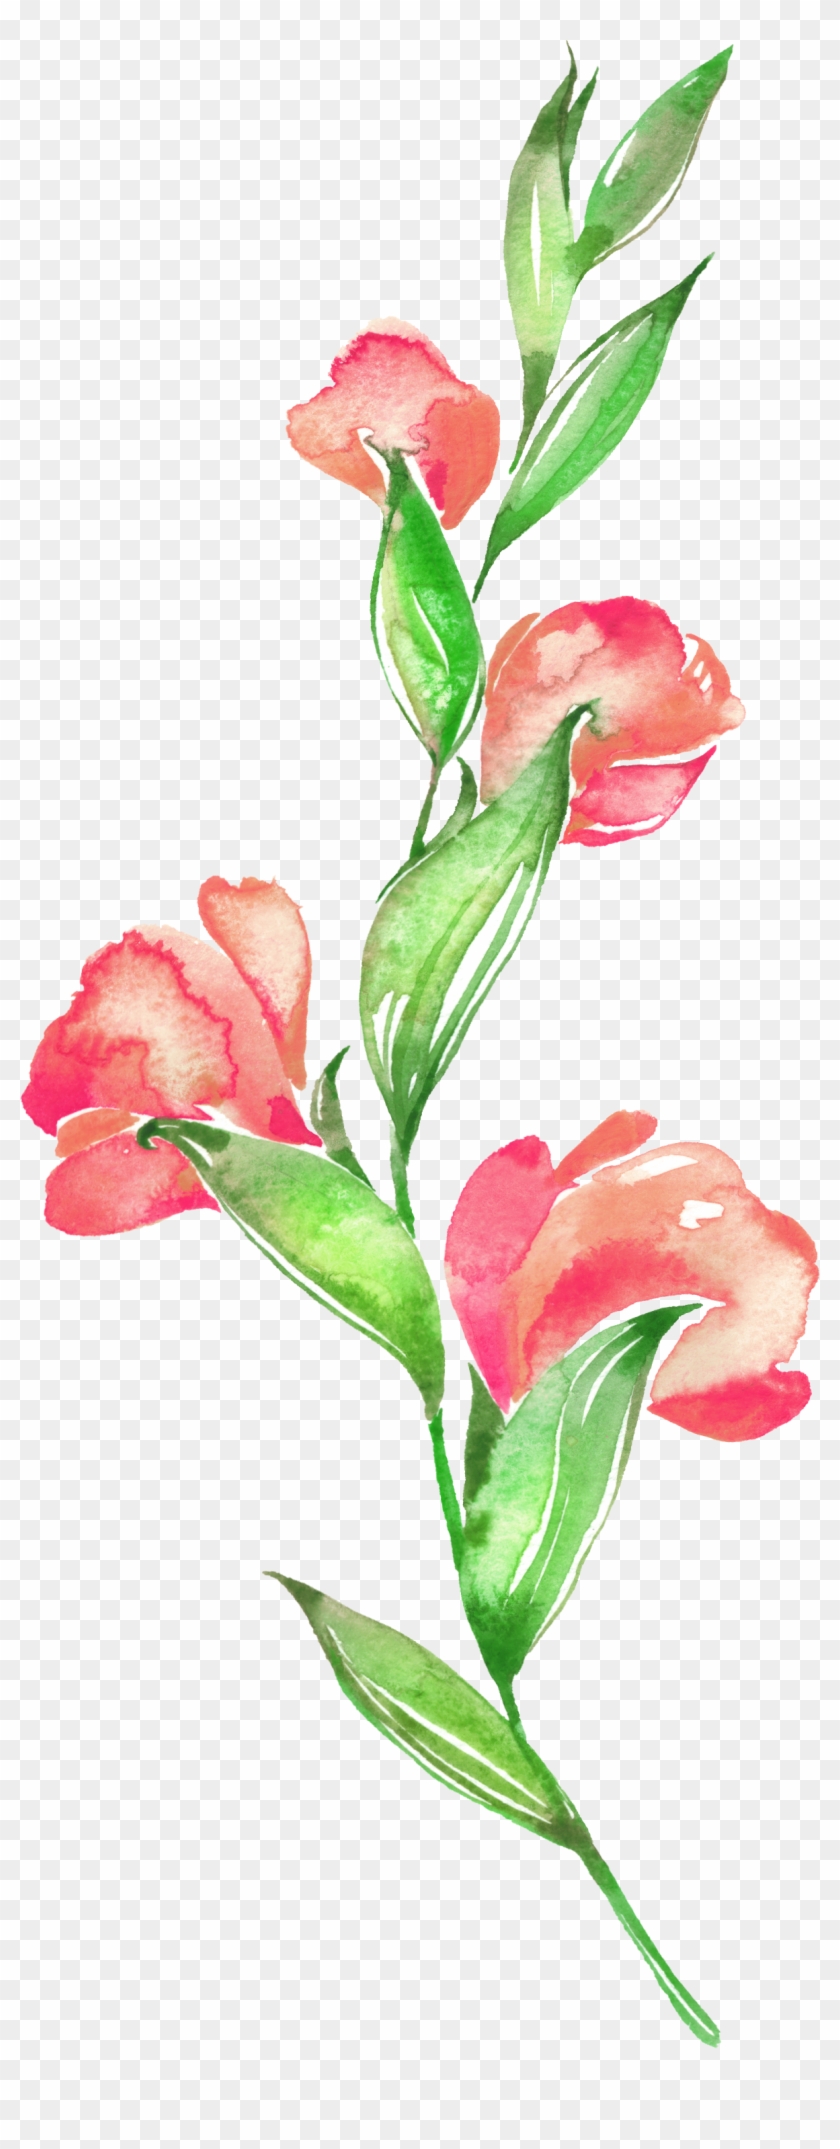 Floral Design Flower Watercolor Painting - Floral Design Flower Watercolor Painting #348005